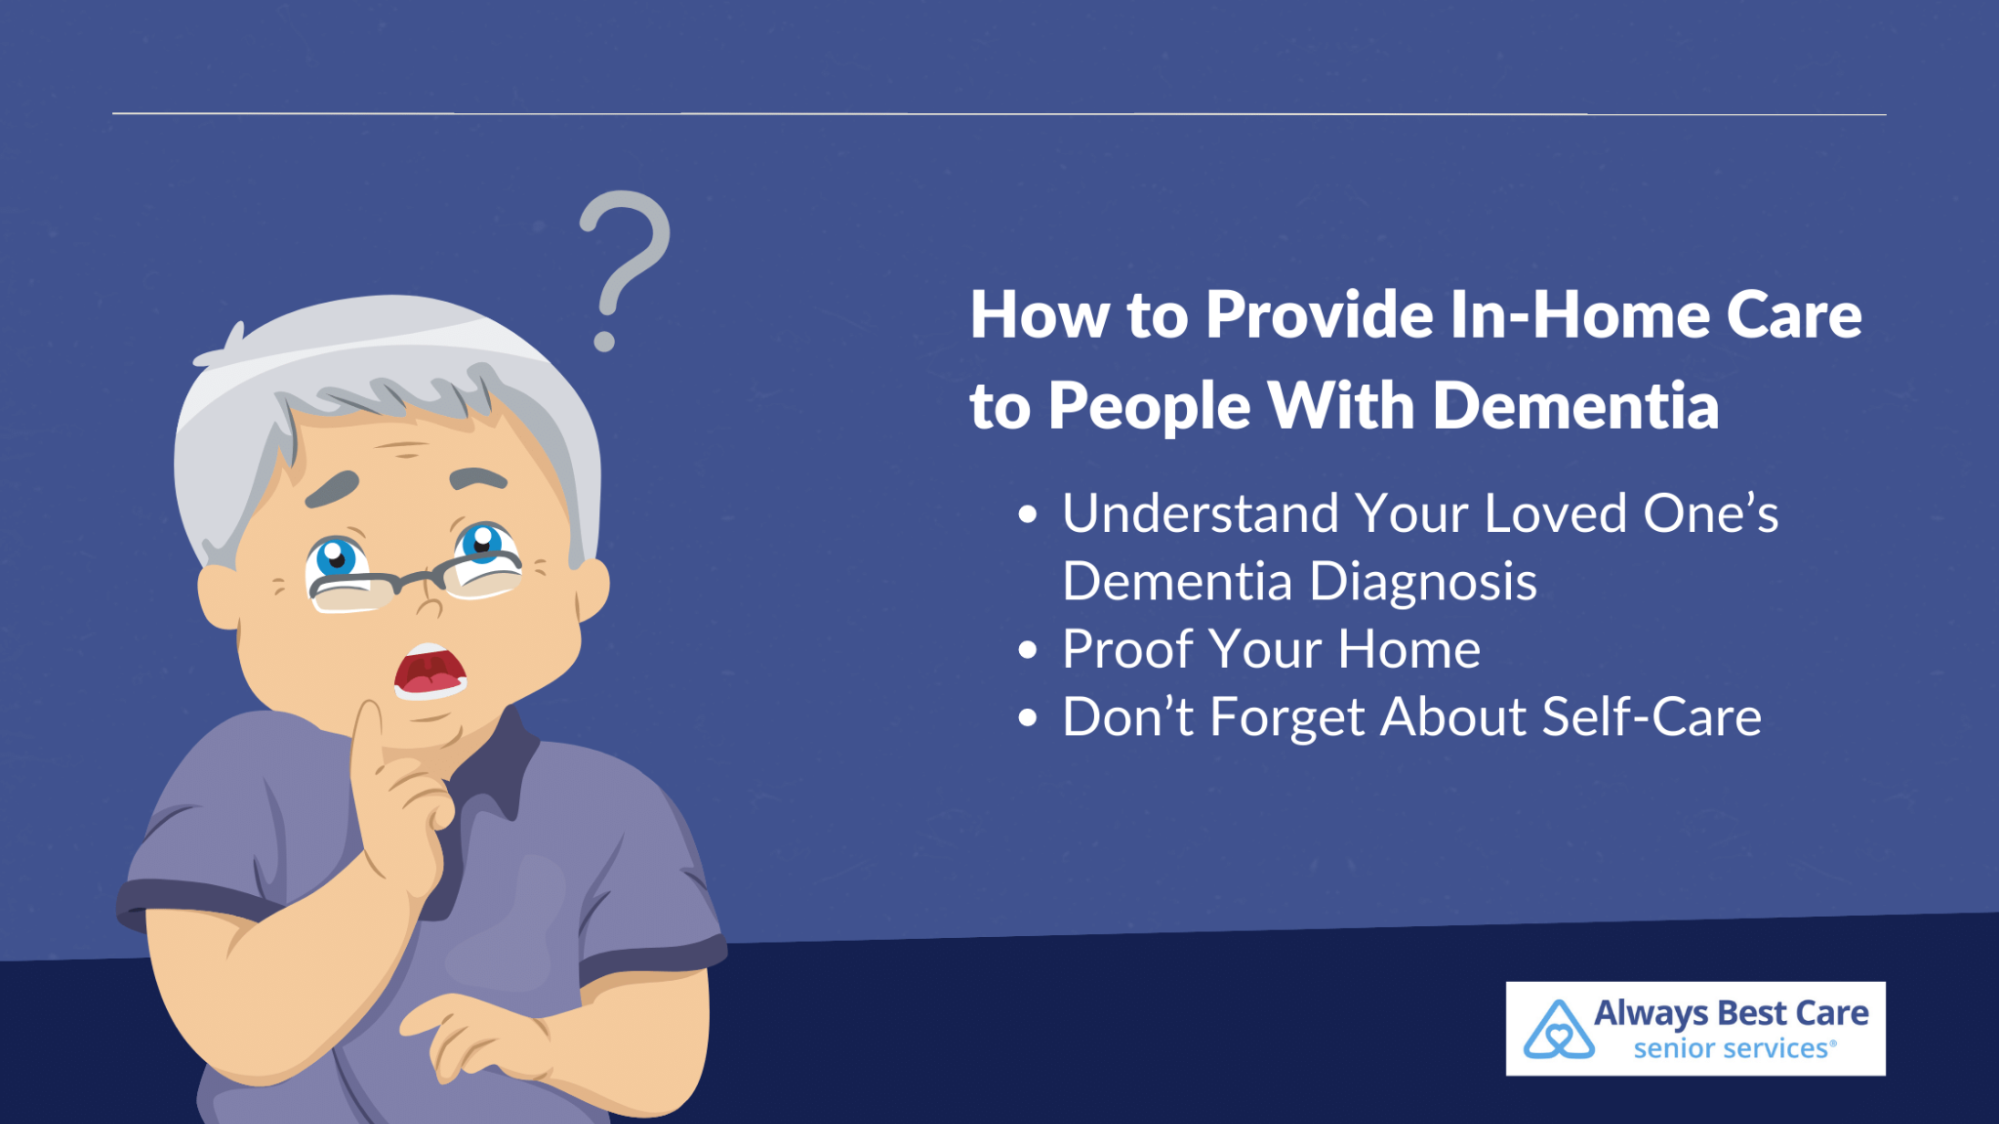 How Do I Provide In-Home Care to People With Dementia?